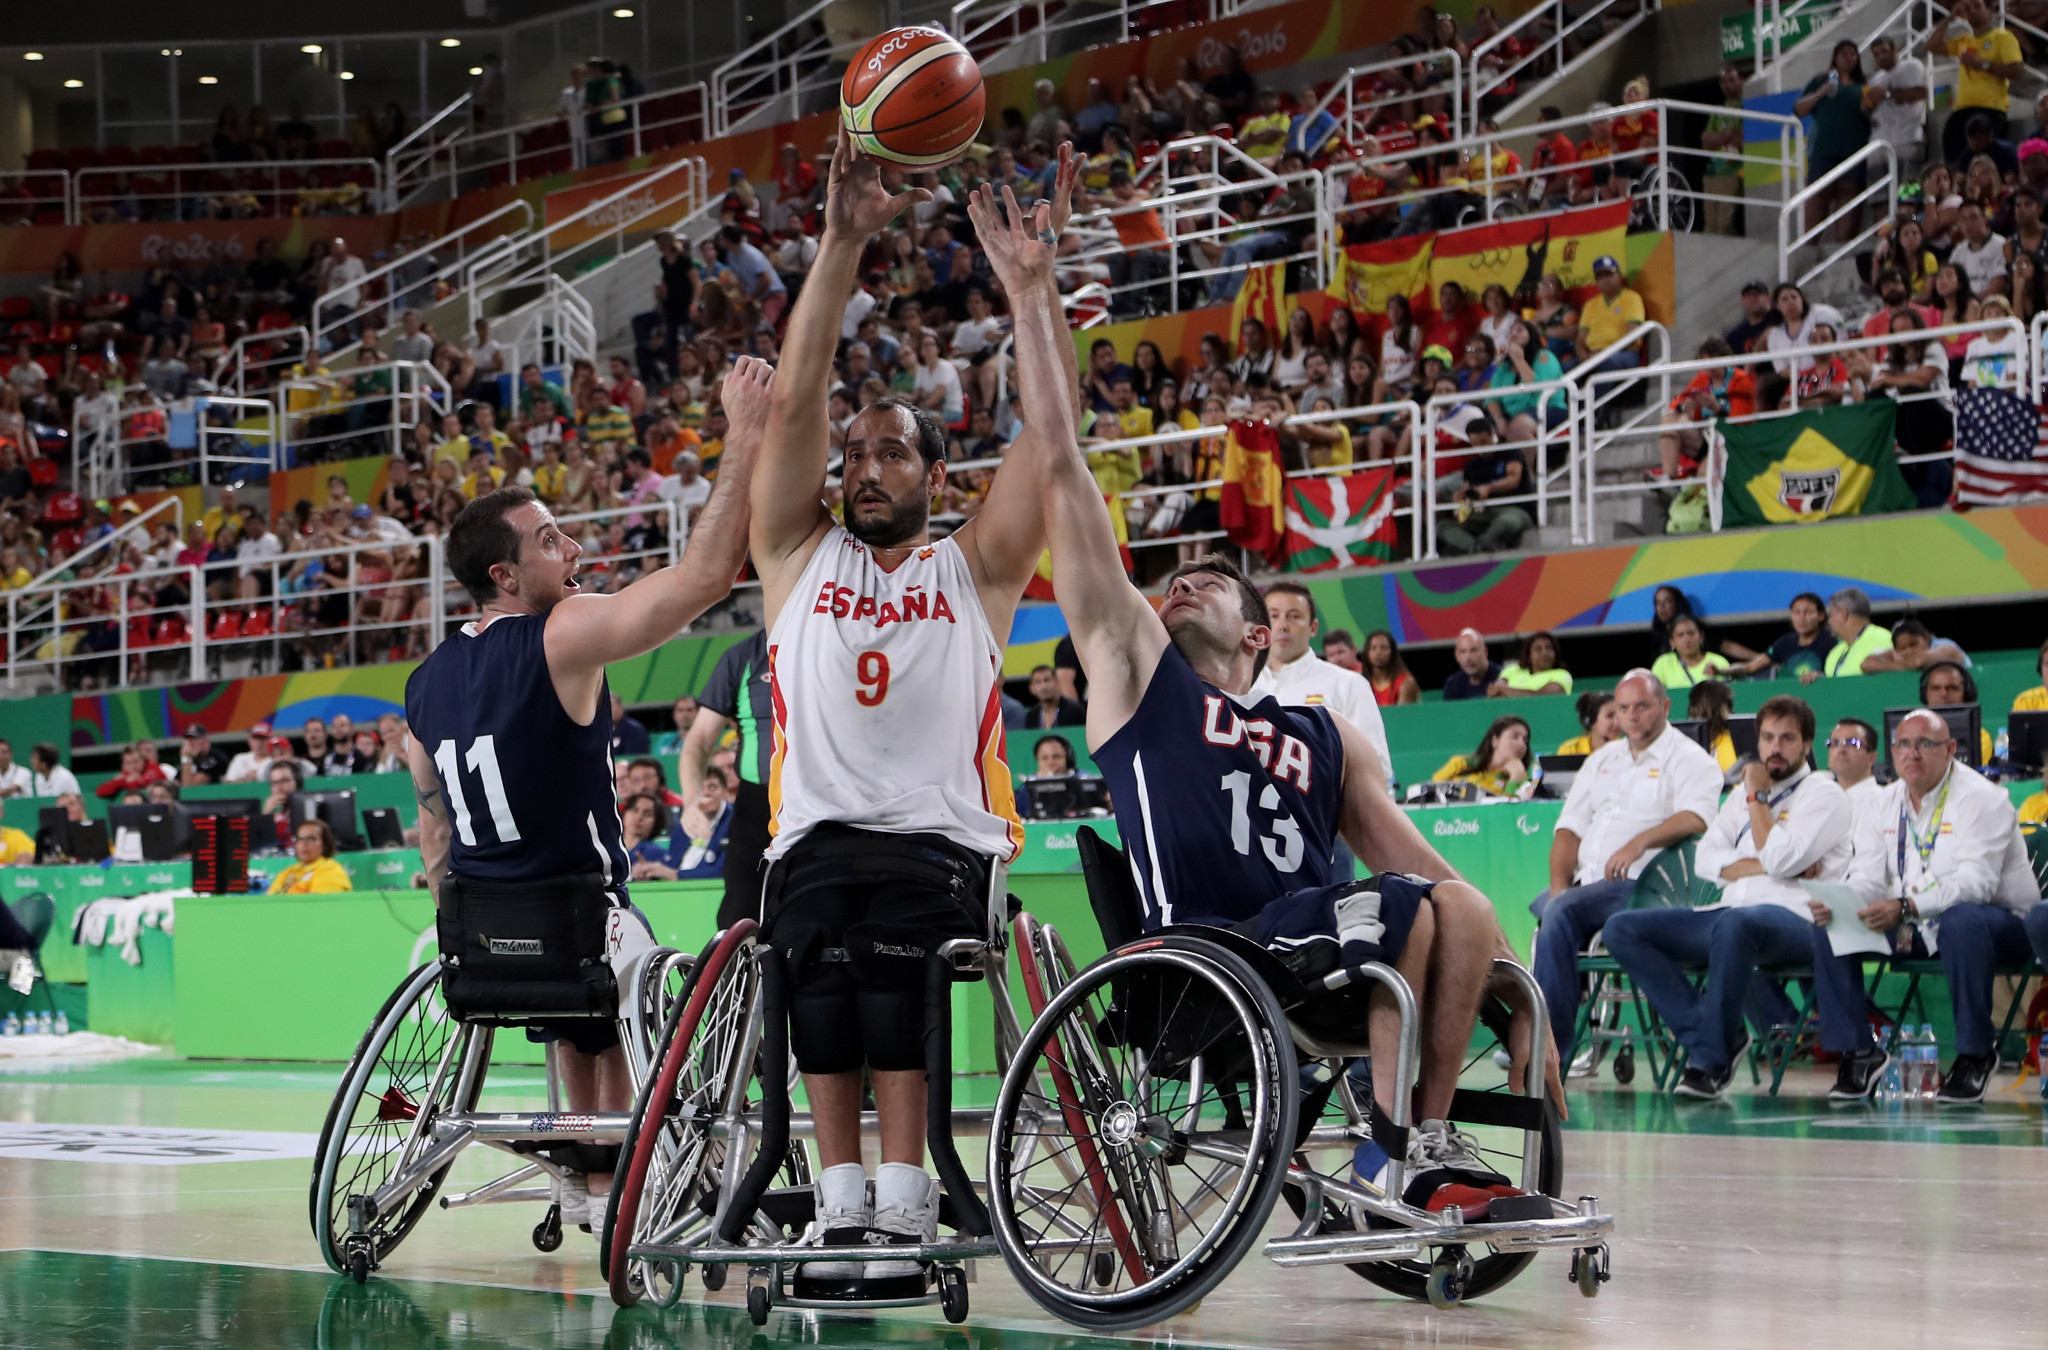 IPC says up to 75 wheelchair basketball athletes should undergo reclassification in time for Tokyo 2020